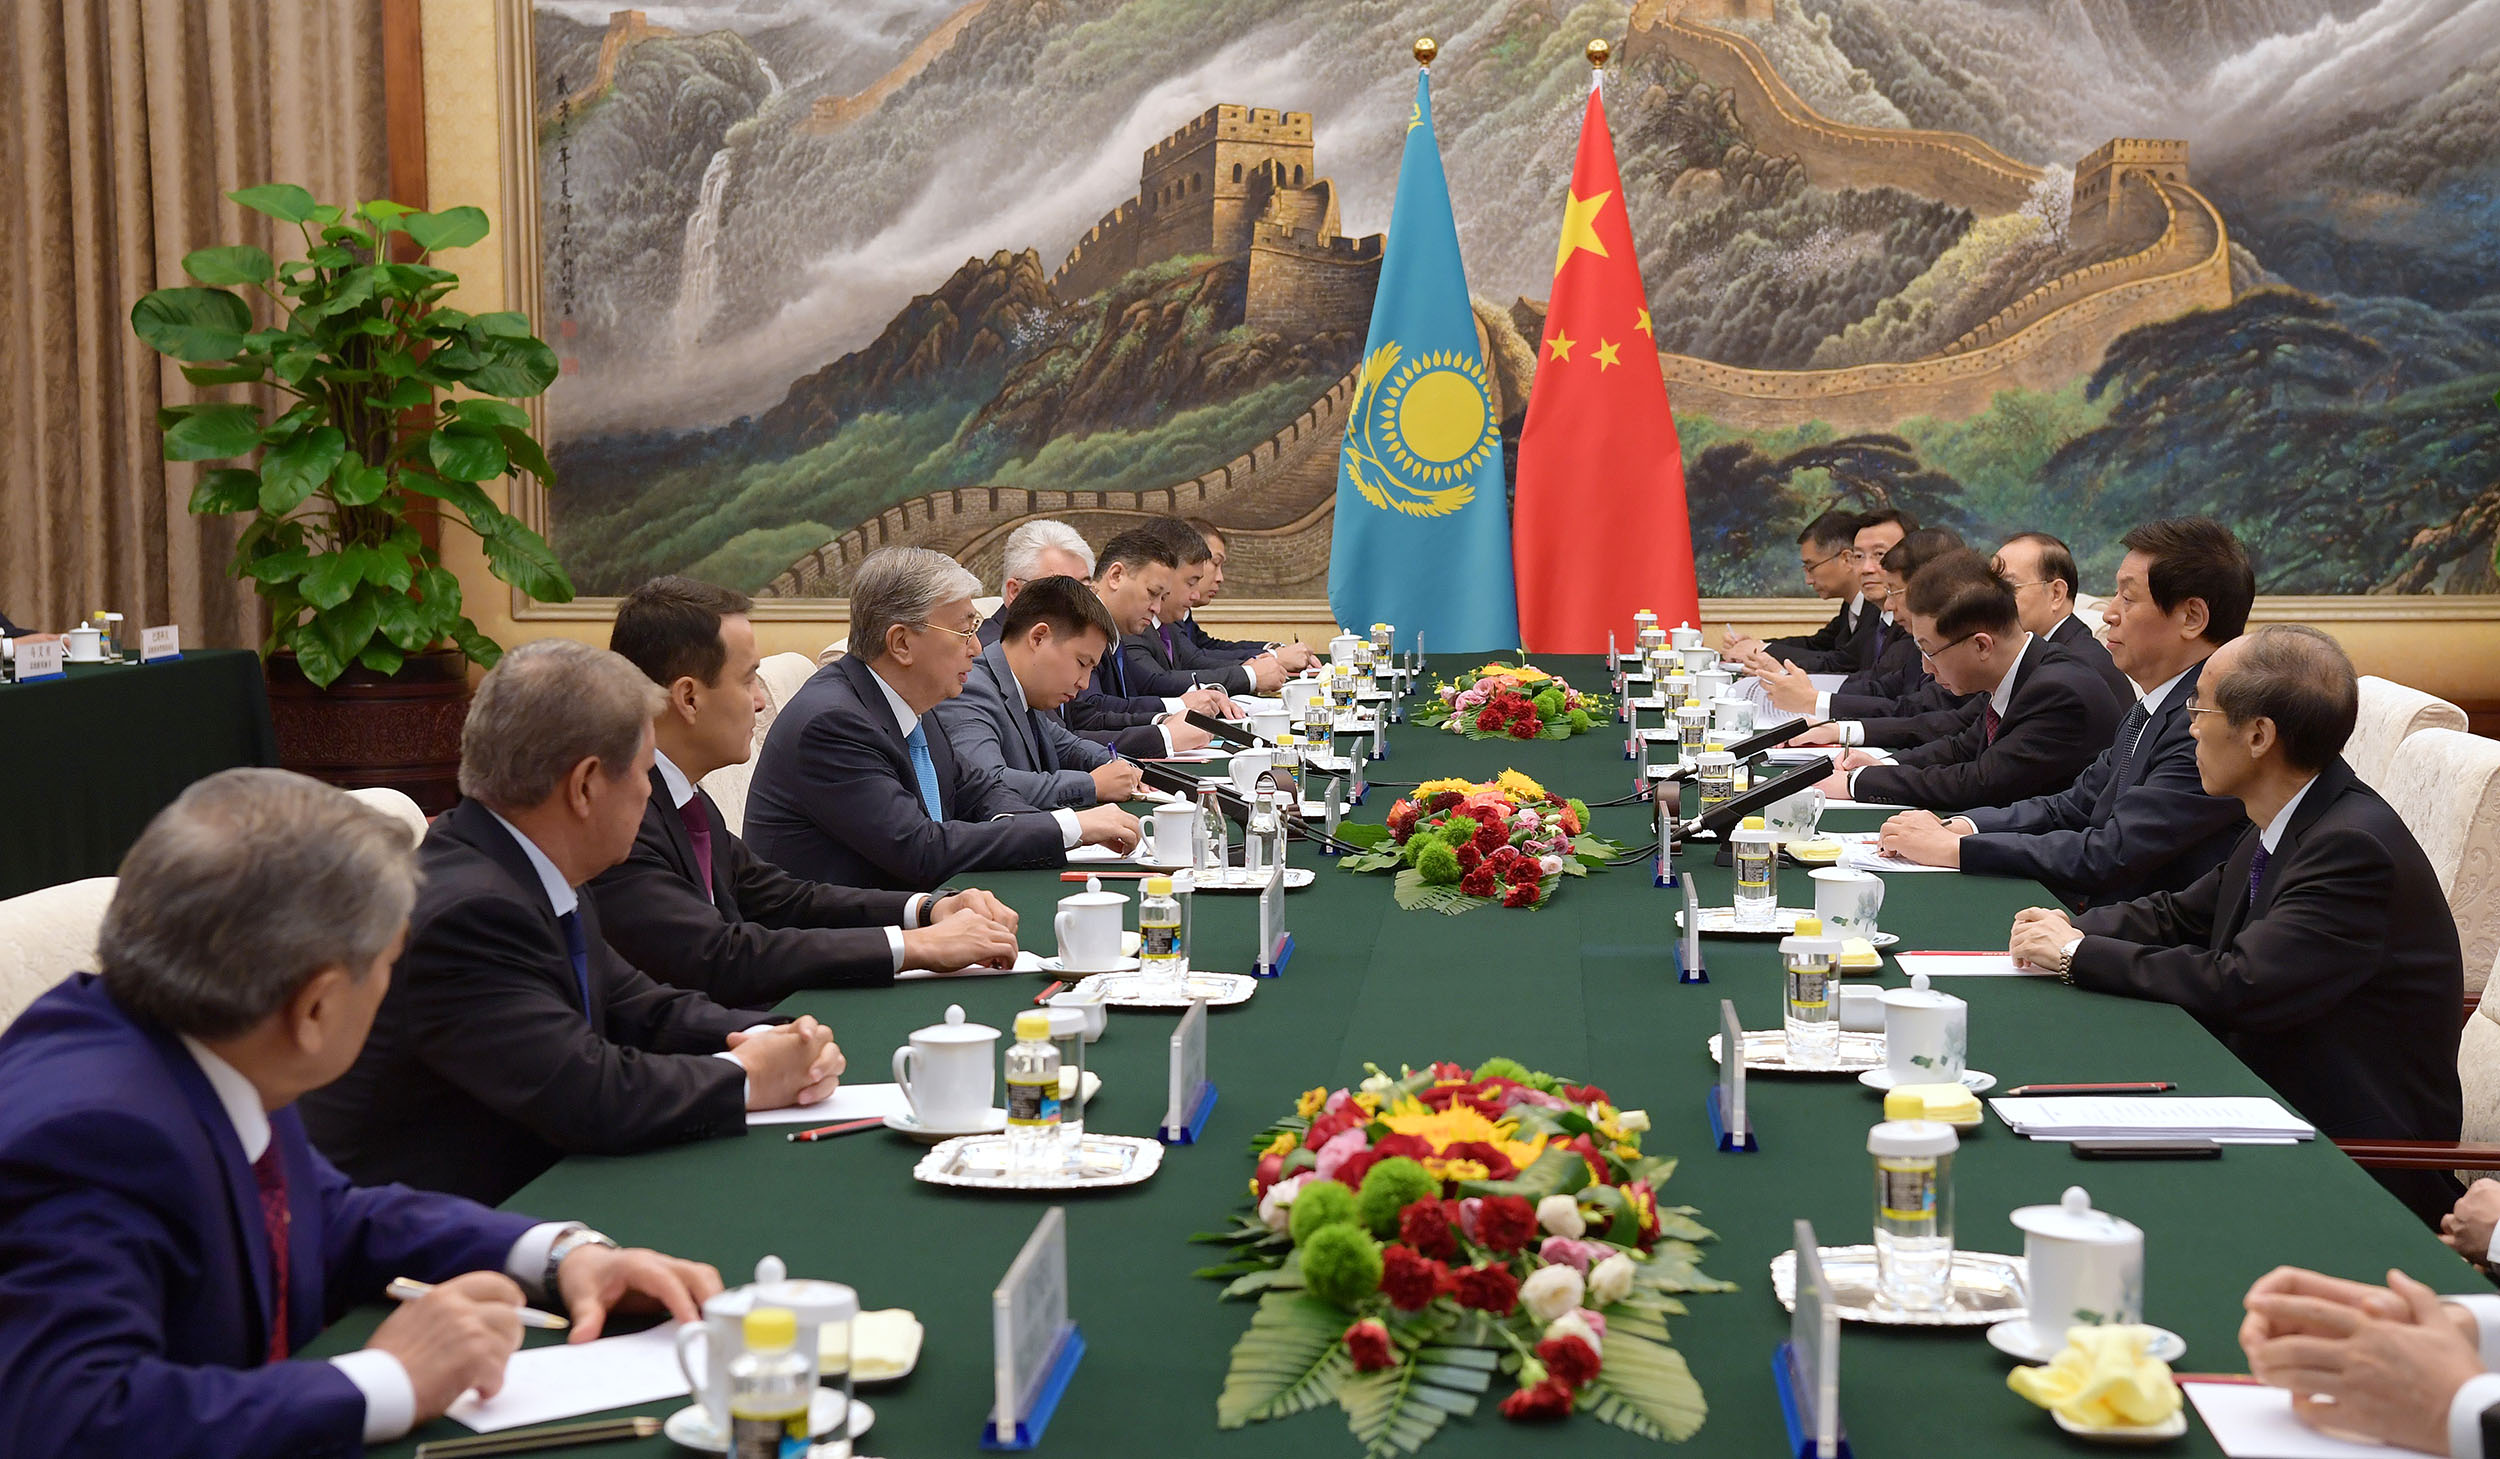 The Head of State meets Chairman of the Standing Committee of the National People's Congress Li Zhanshu